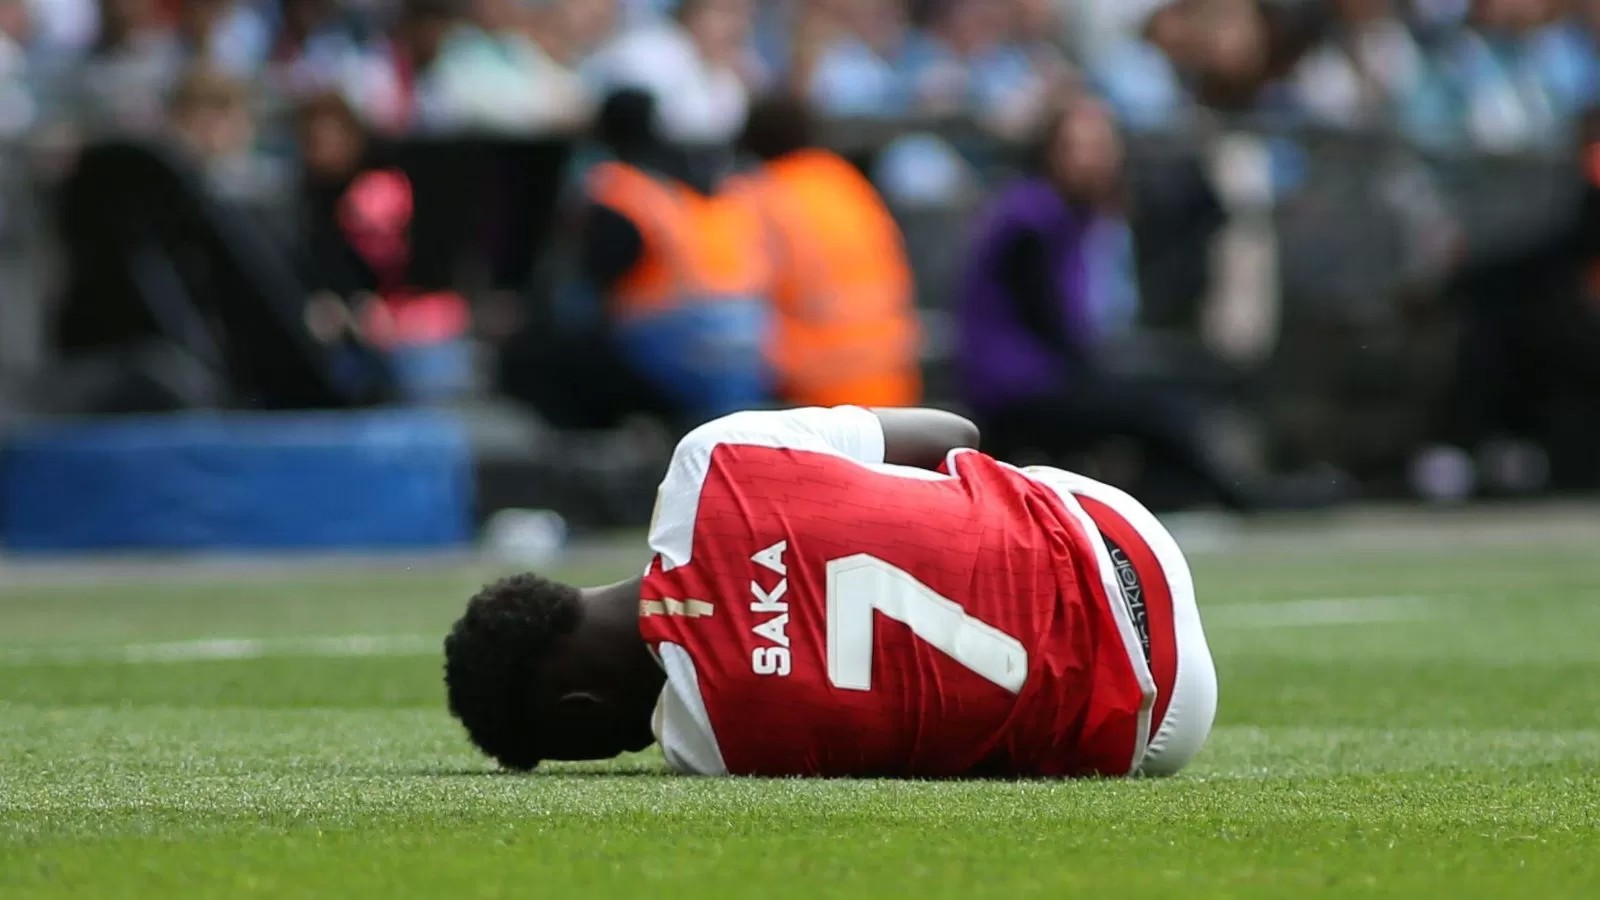 Arsenal: Saka could ‘possibly’ miss Bournemouth trip as Arteta reveals 86-game record is in jeopardy